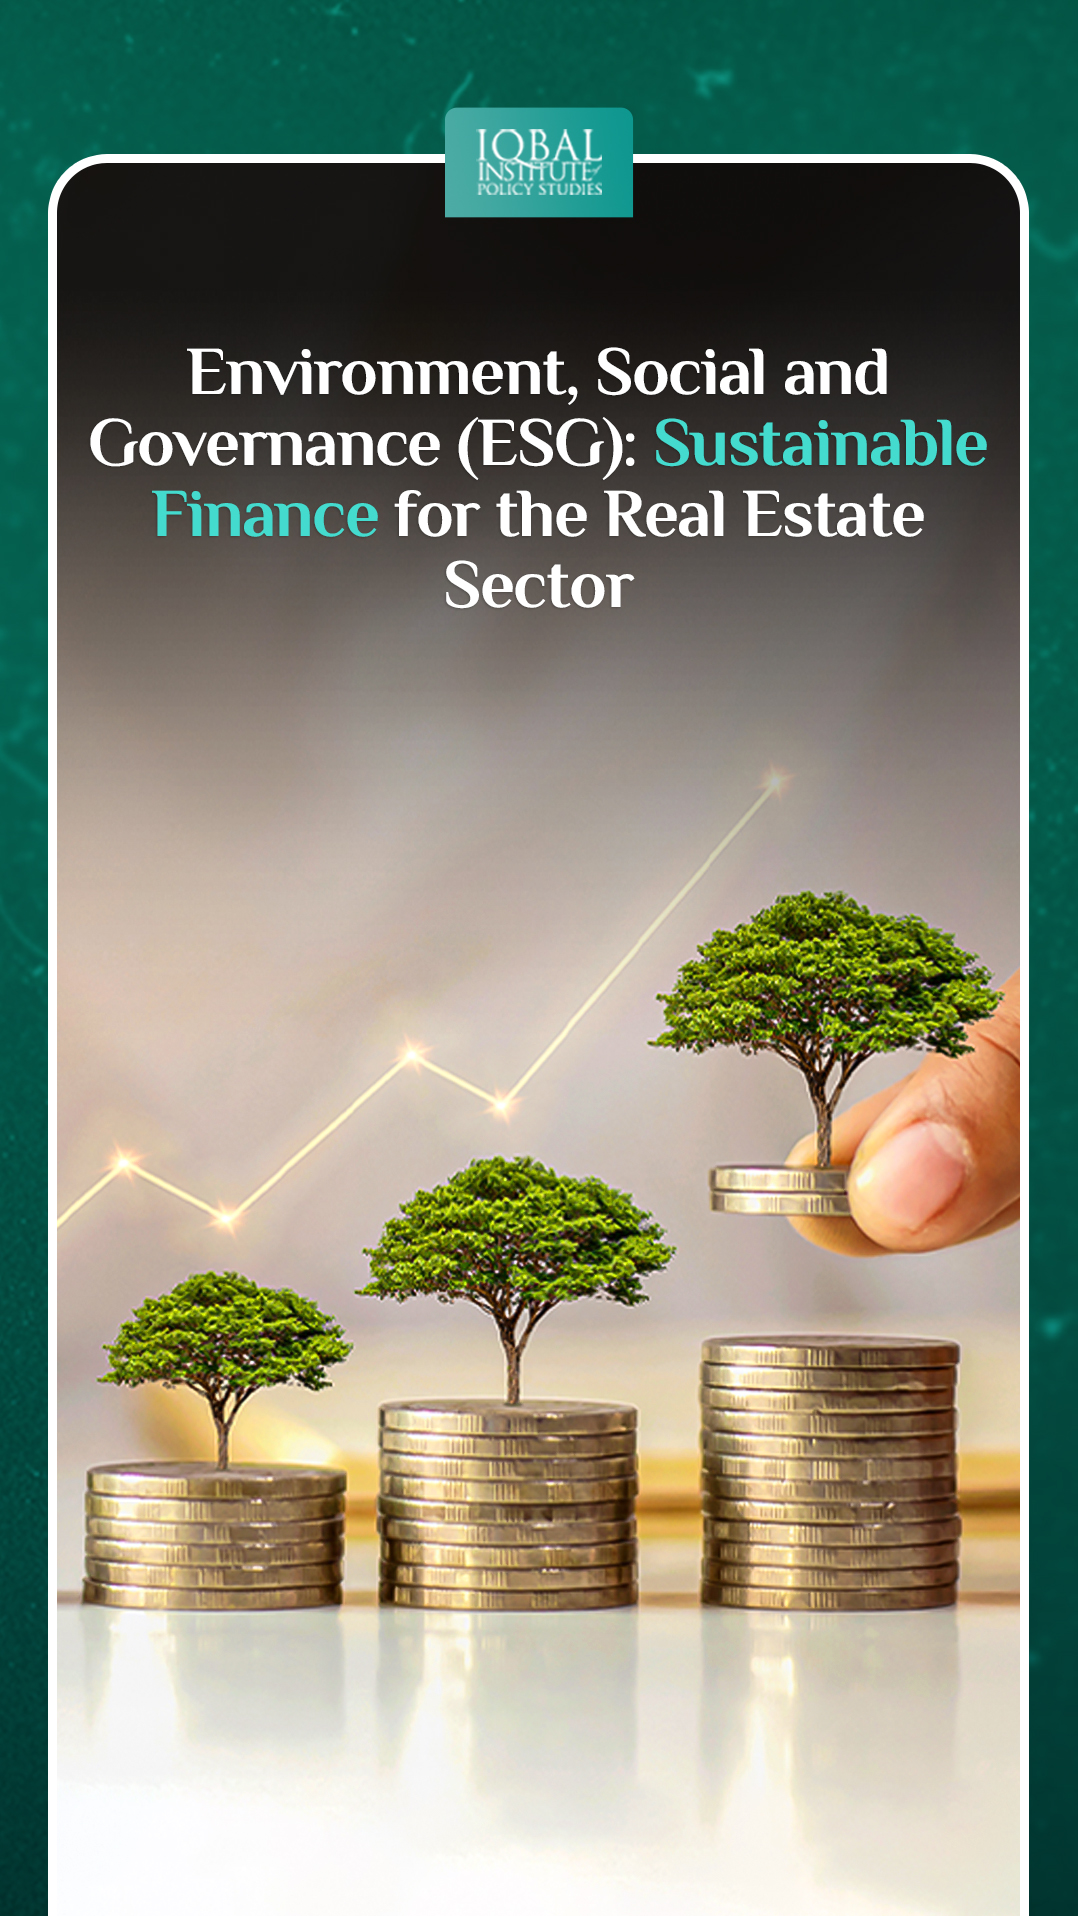 Environment, Social and Governance (ESG): Sustainable Finance for the Real Estate Sector